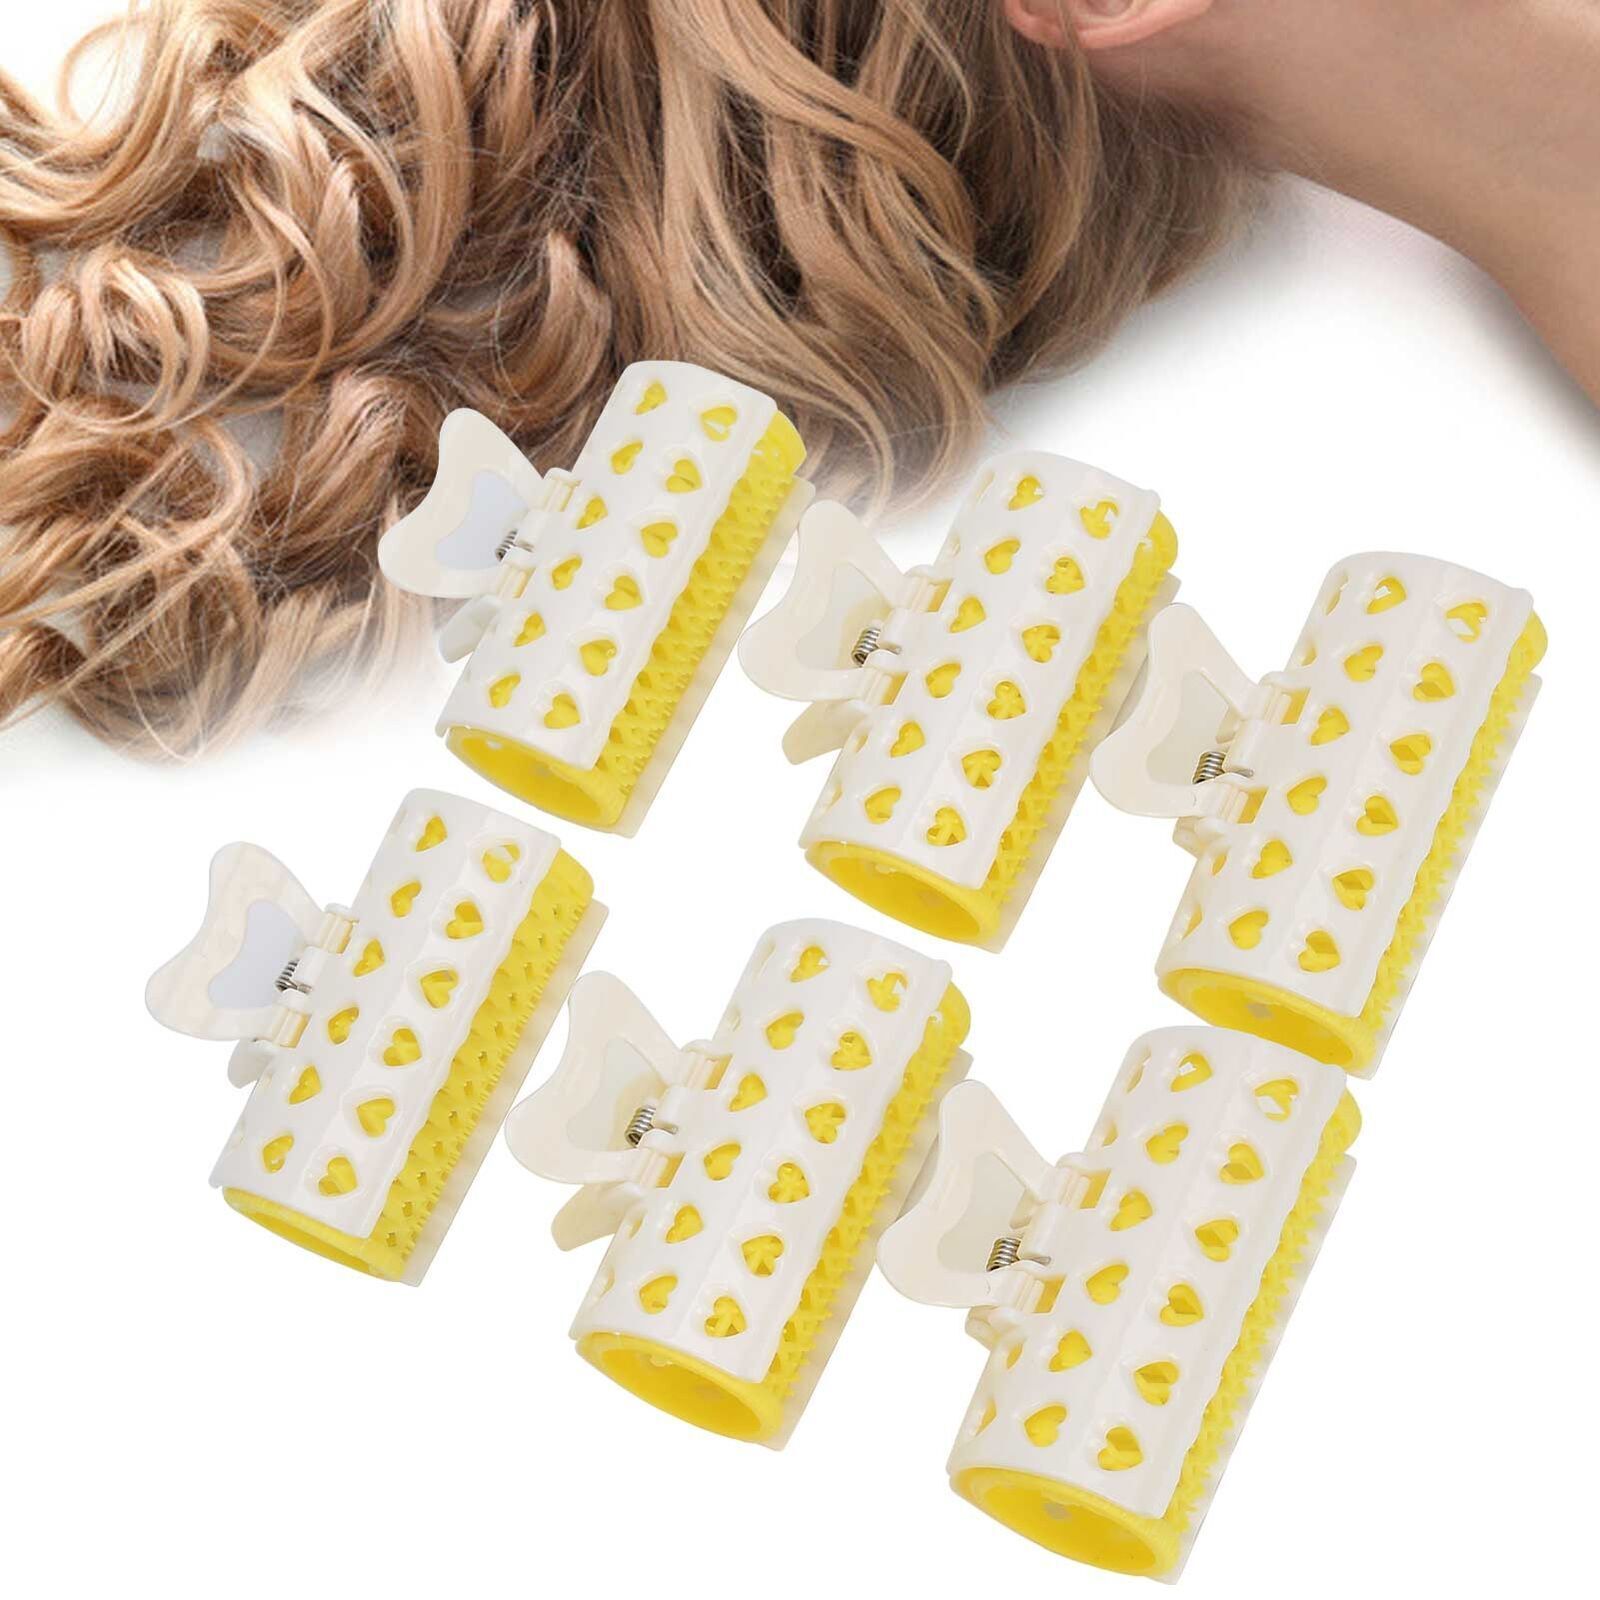 6pcs/set Hair Roller Clamps Curler Portable DIY Hairdressing Tools for